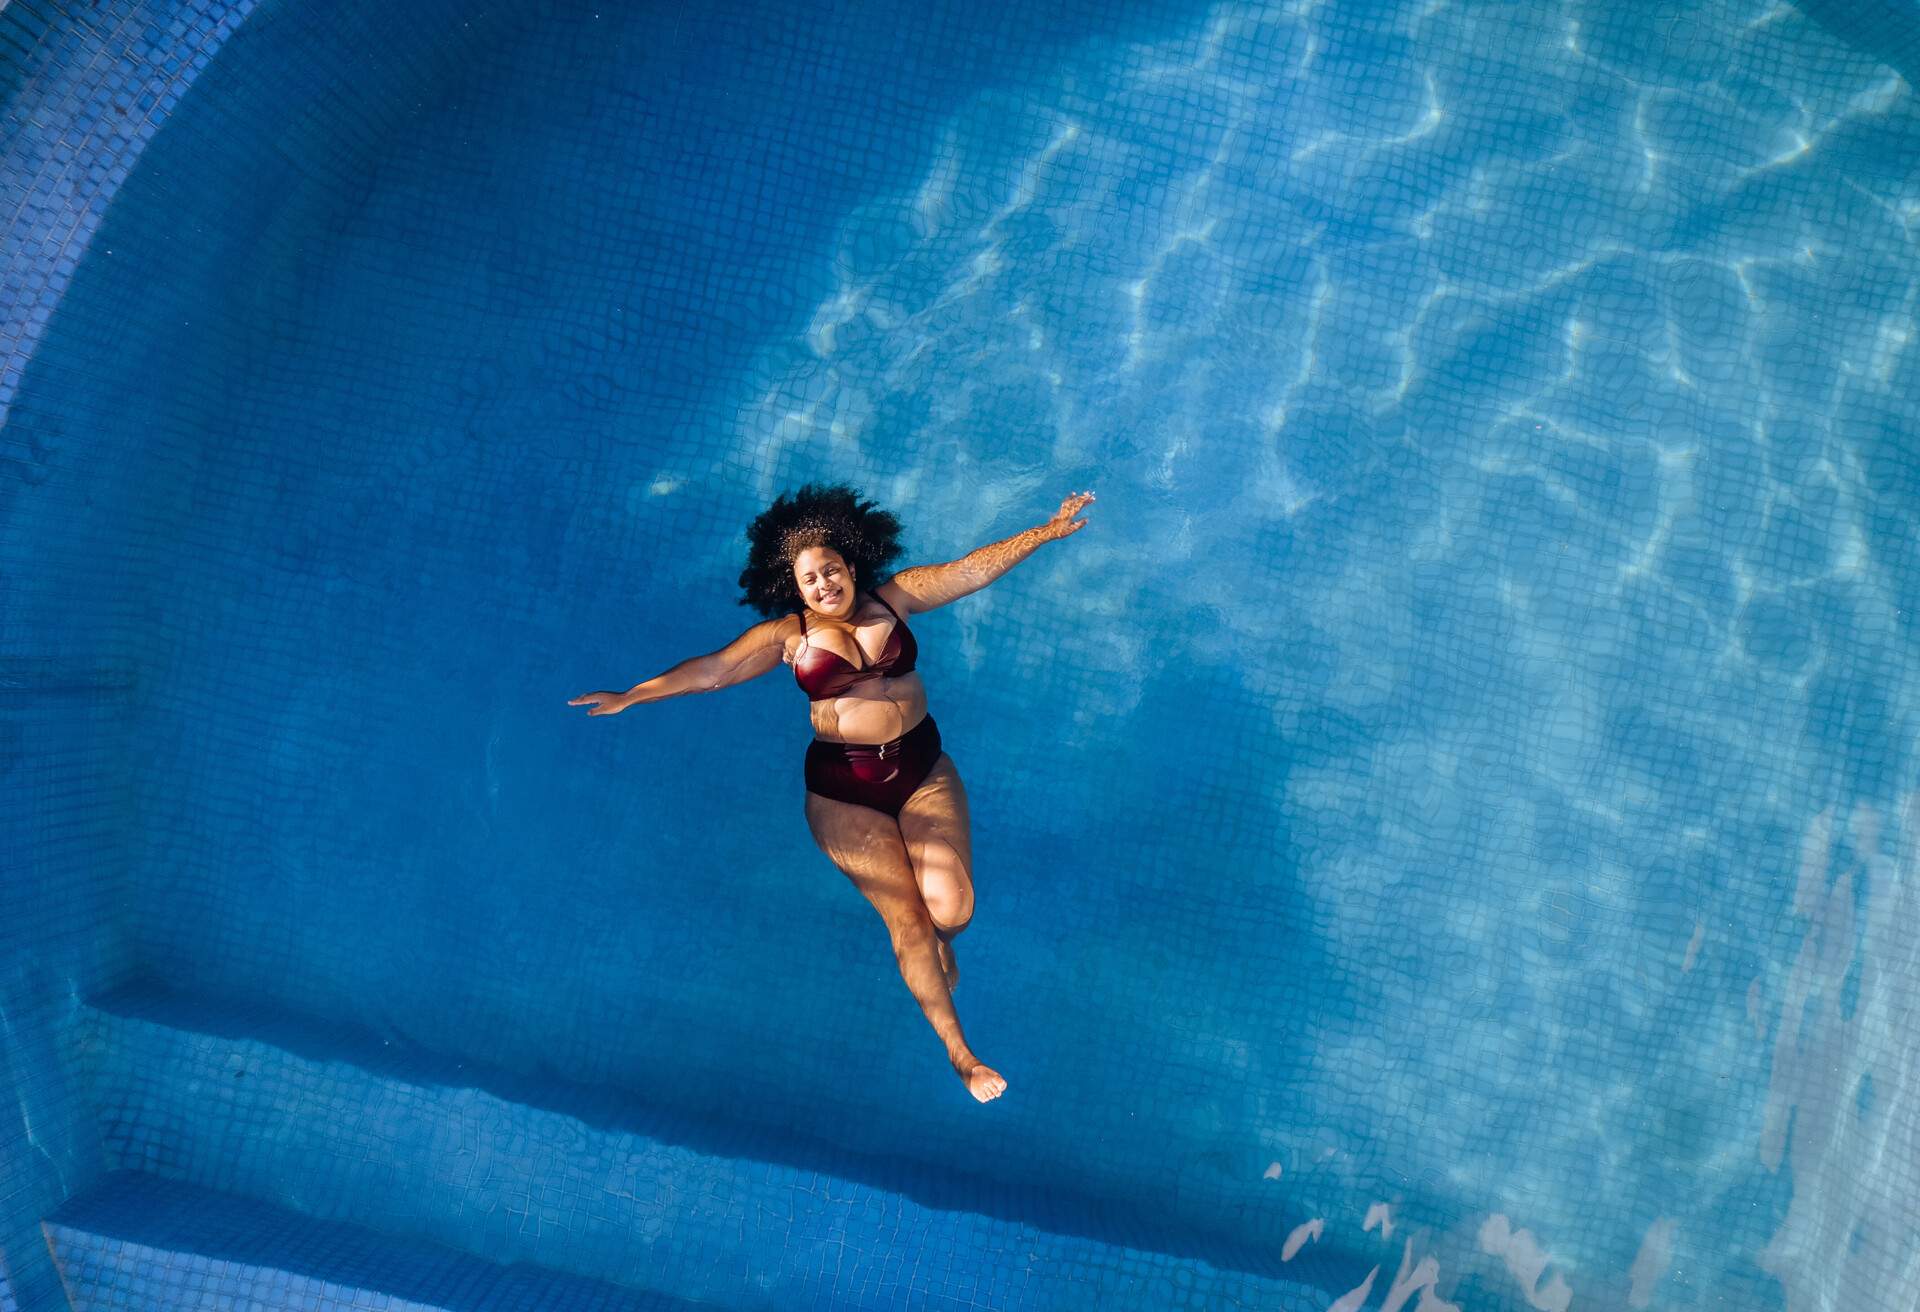 A woman in a bikini relaxes in a swimming pool, floating peacefully in the cool and refreshing water.